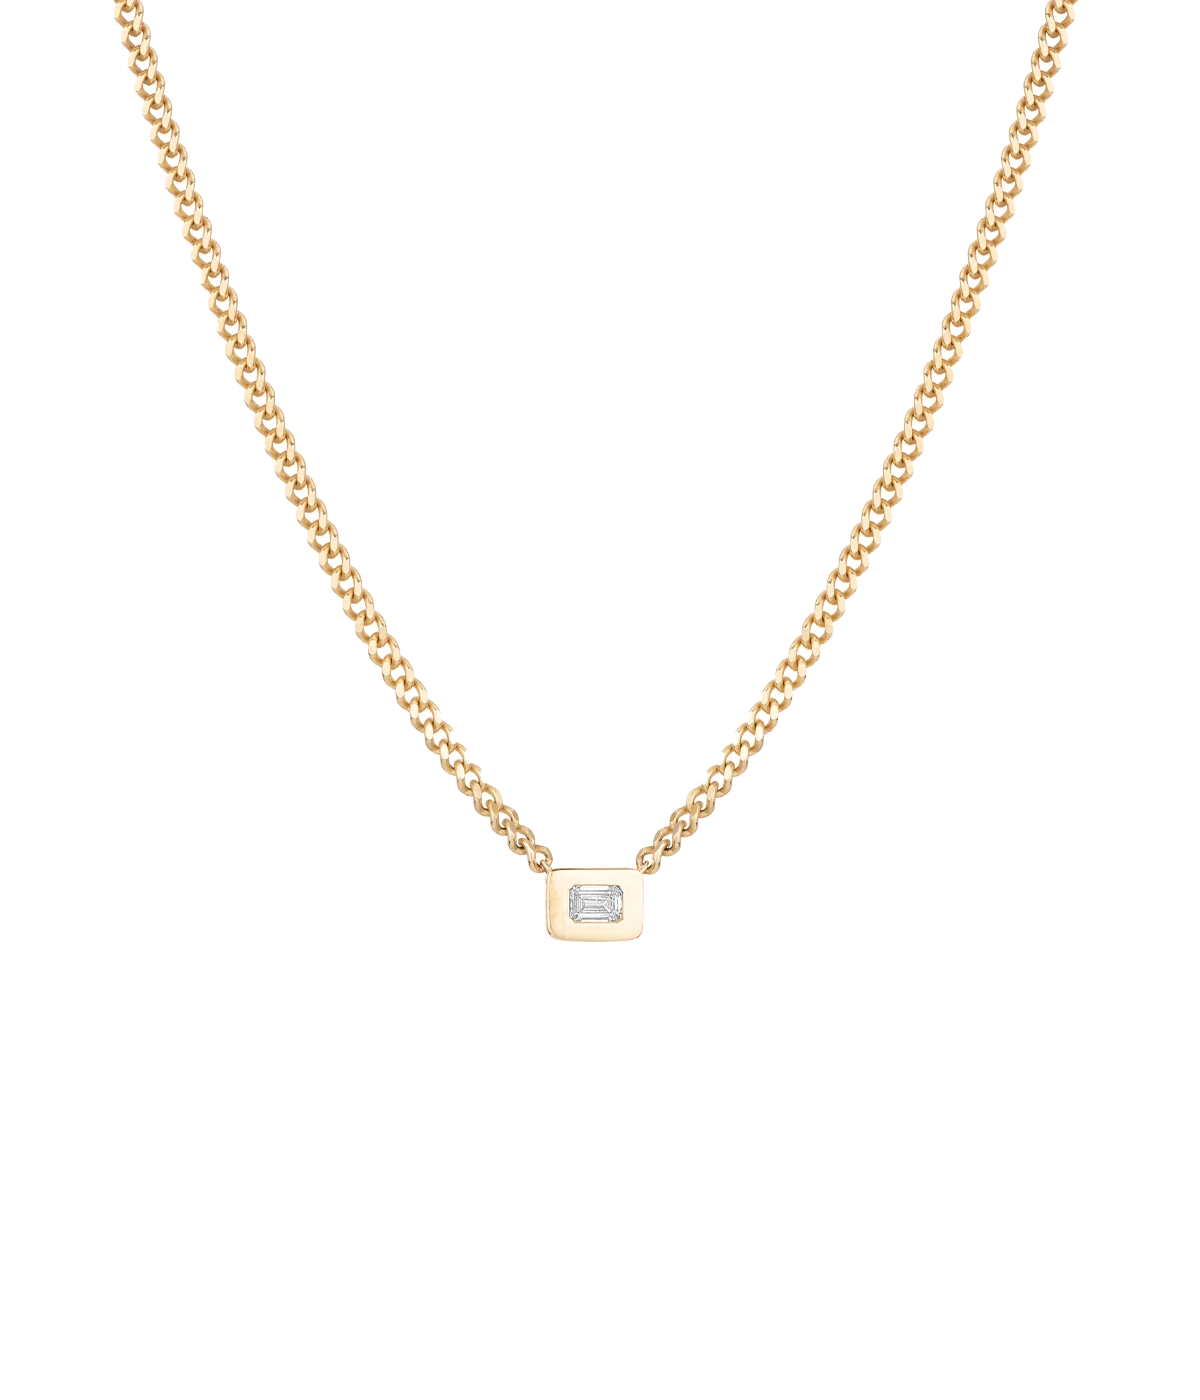 A round bezel-set lab grown diamond necklace in 14k yellow gold with an adjustable chain. Every day wear, minimal jewellery, gold jewellery, classic diamond necklace.